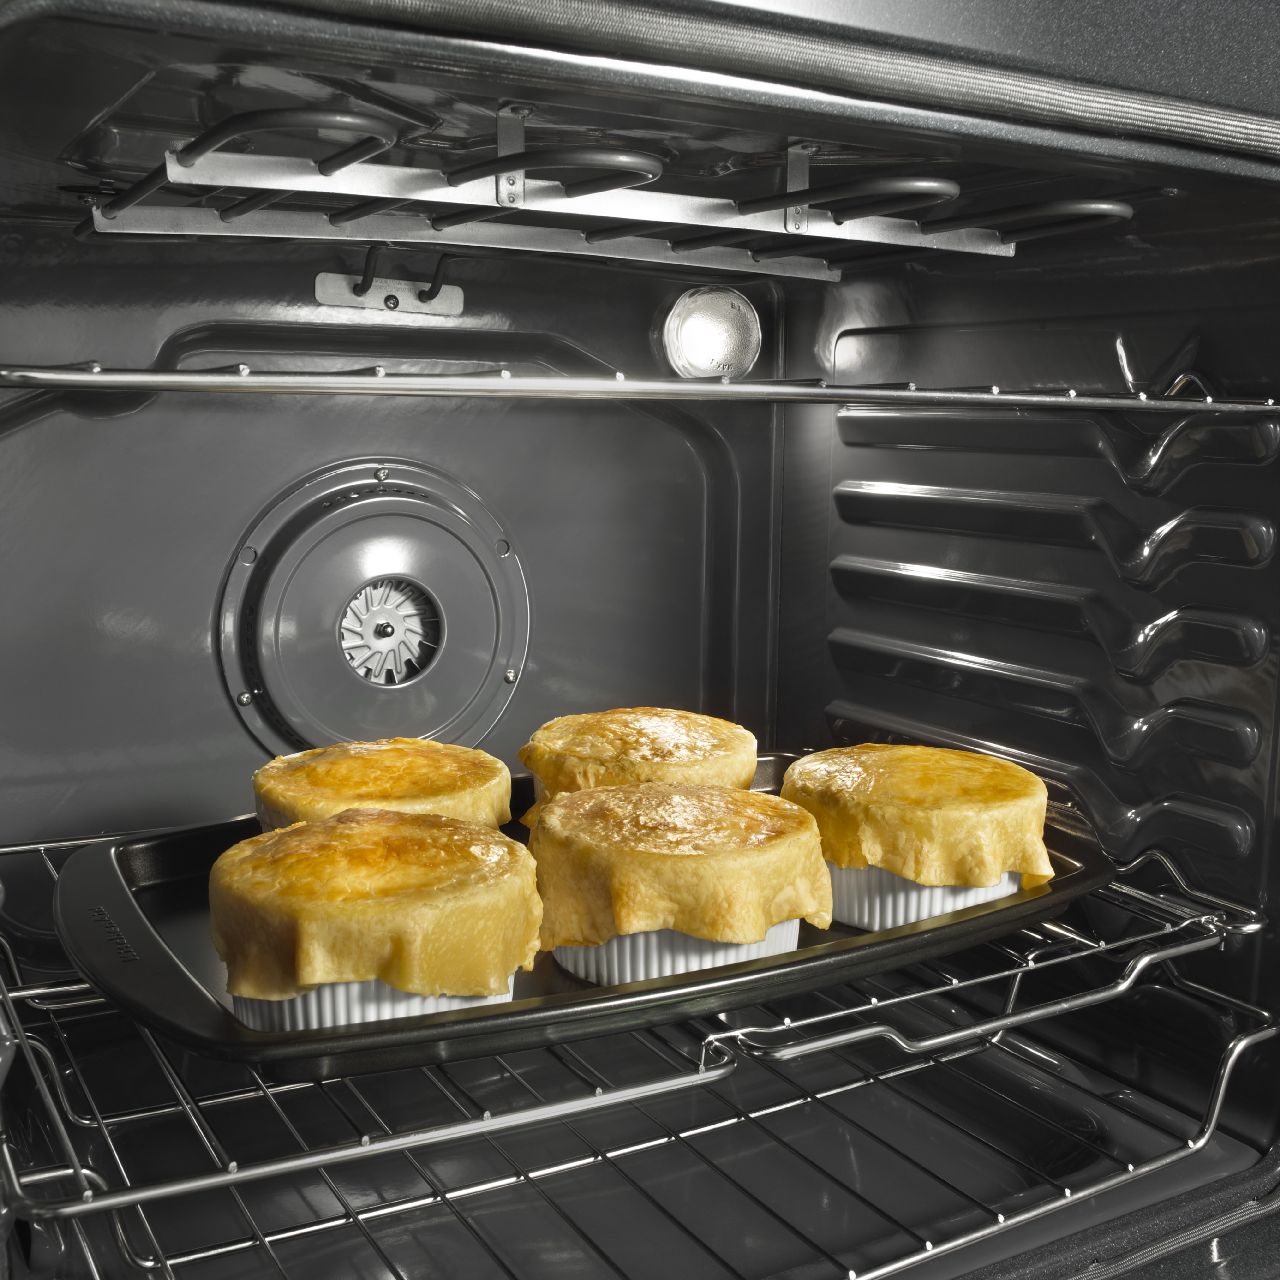 How to Remove and Replace the Light in Your Oven - A to Z Appliance Service